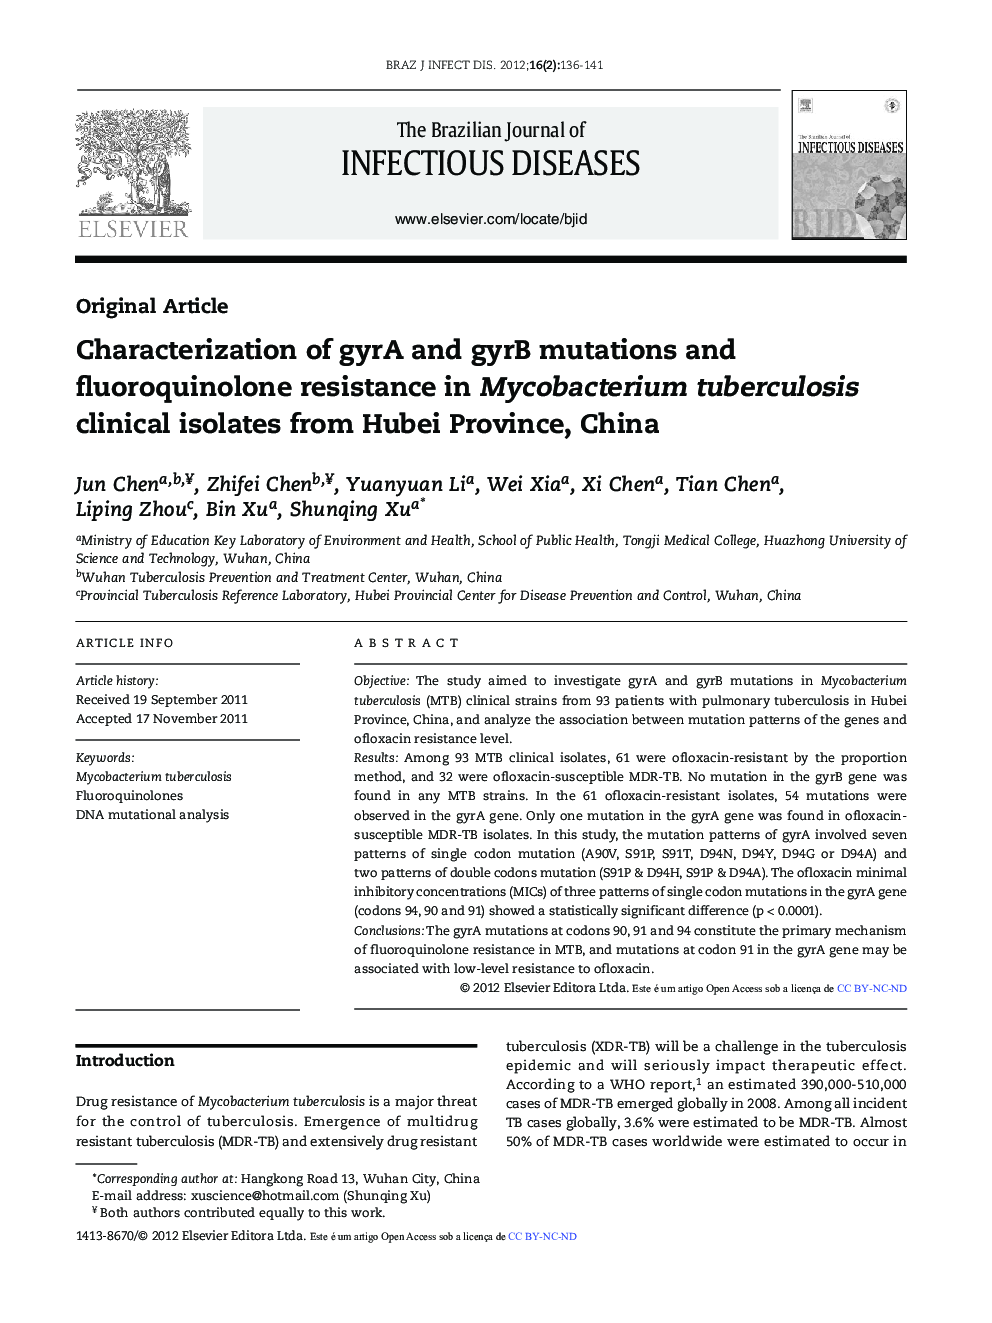 Characterization of gyrA and gyrB mutations and fluoroquinolone resistance in Mycobacterium tuberculosis clinical isolates from Hubei Province, China